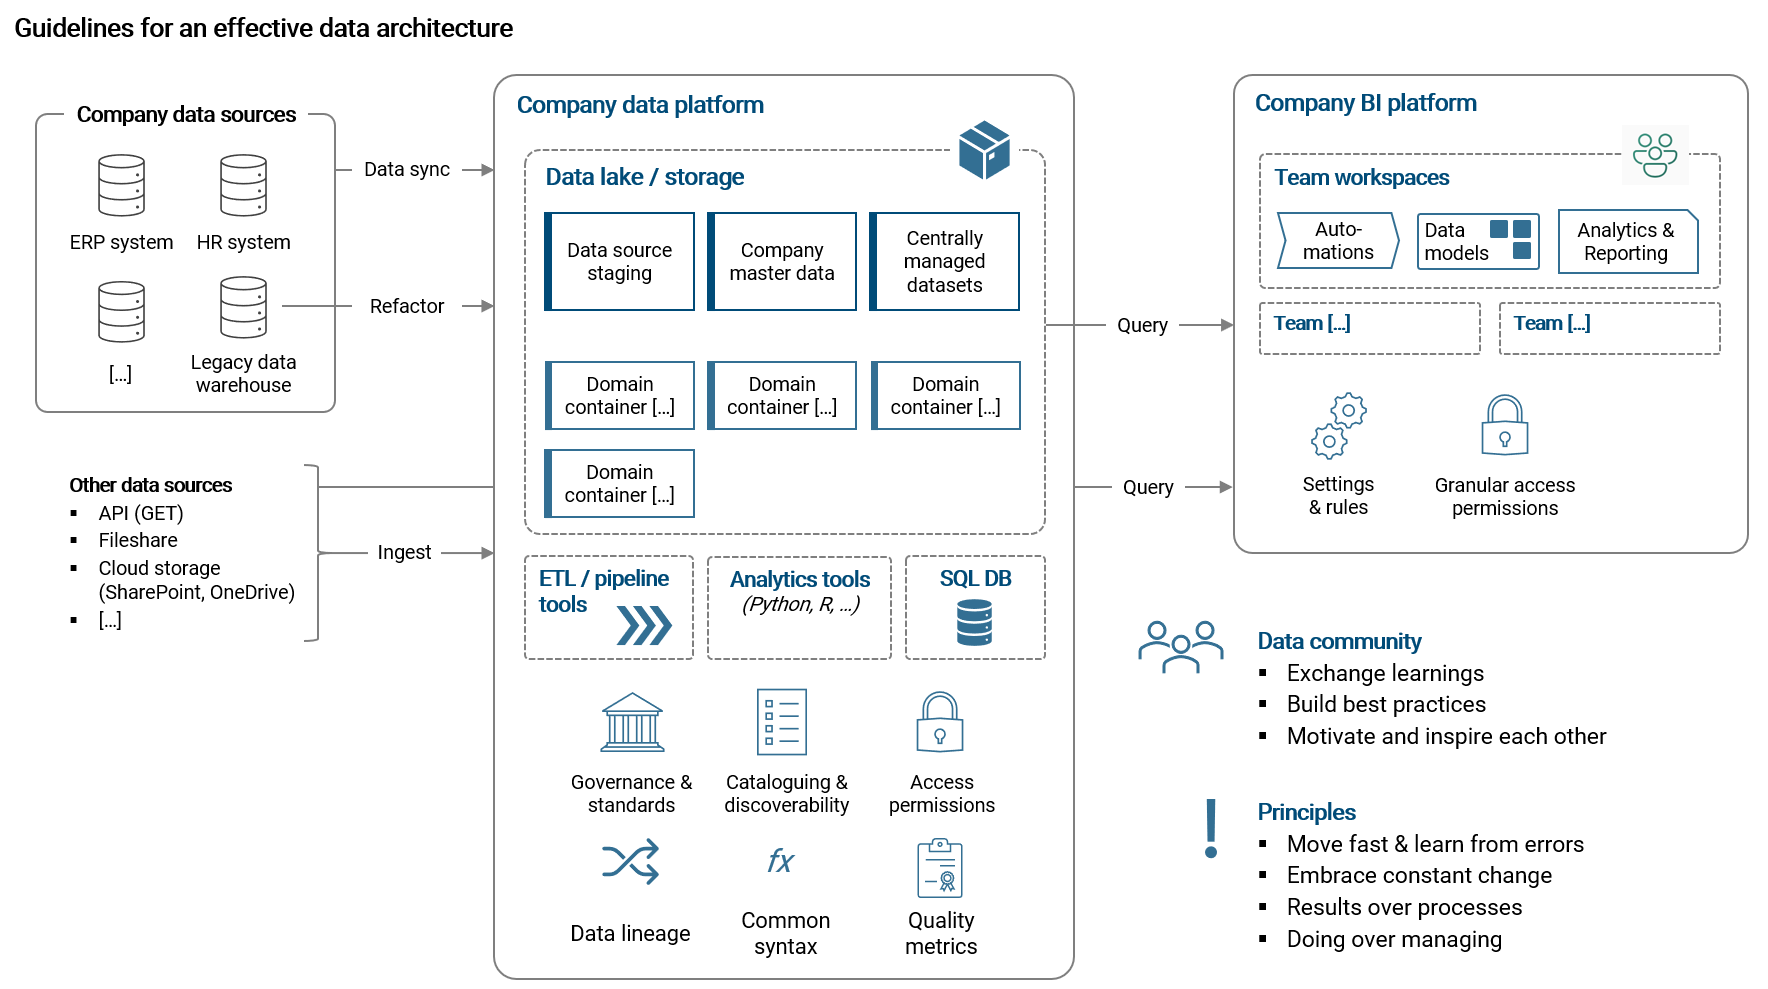 Components of an effective data architecture